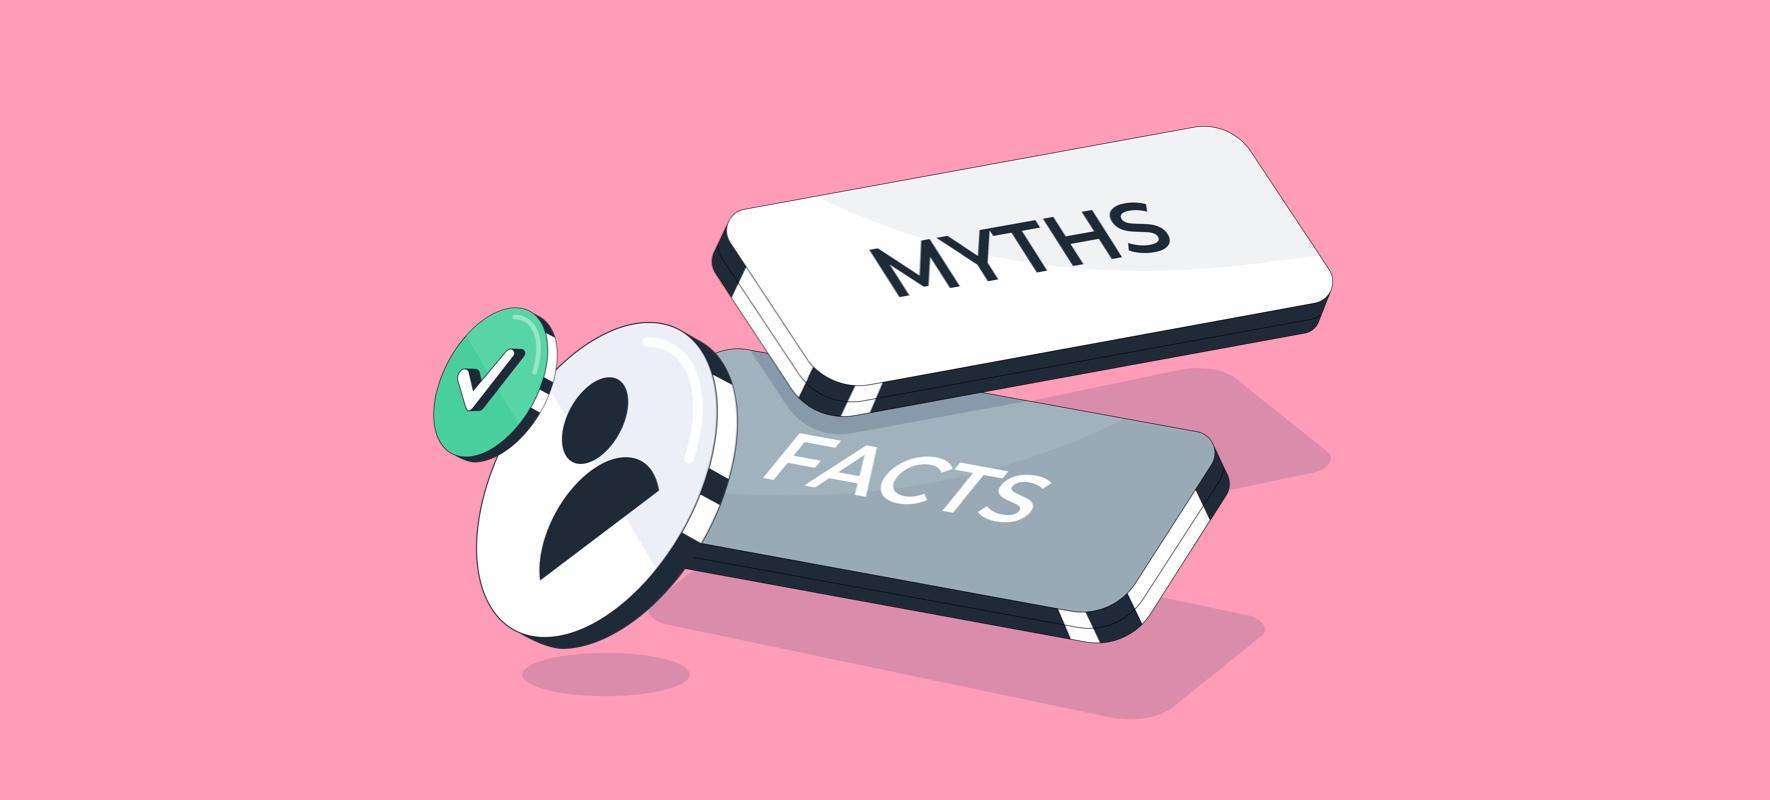 Two rectangular shaped elements with myths and facts written on them. A user icon with green tick mark is depicting the myths and facts about employee background screening.